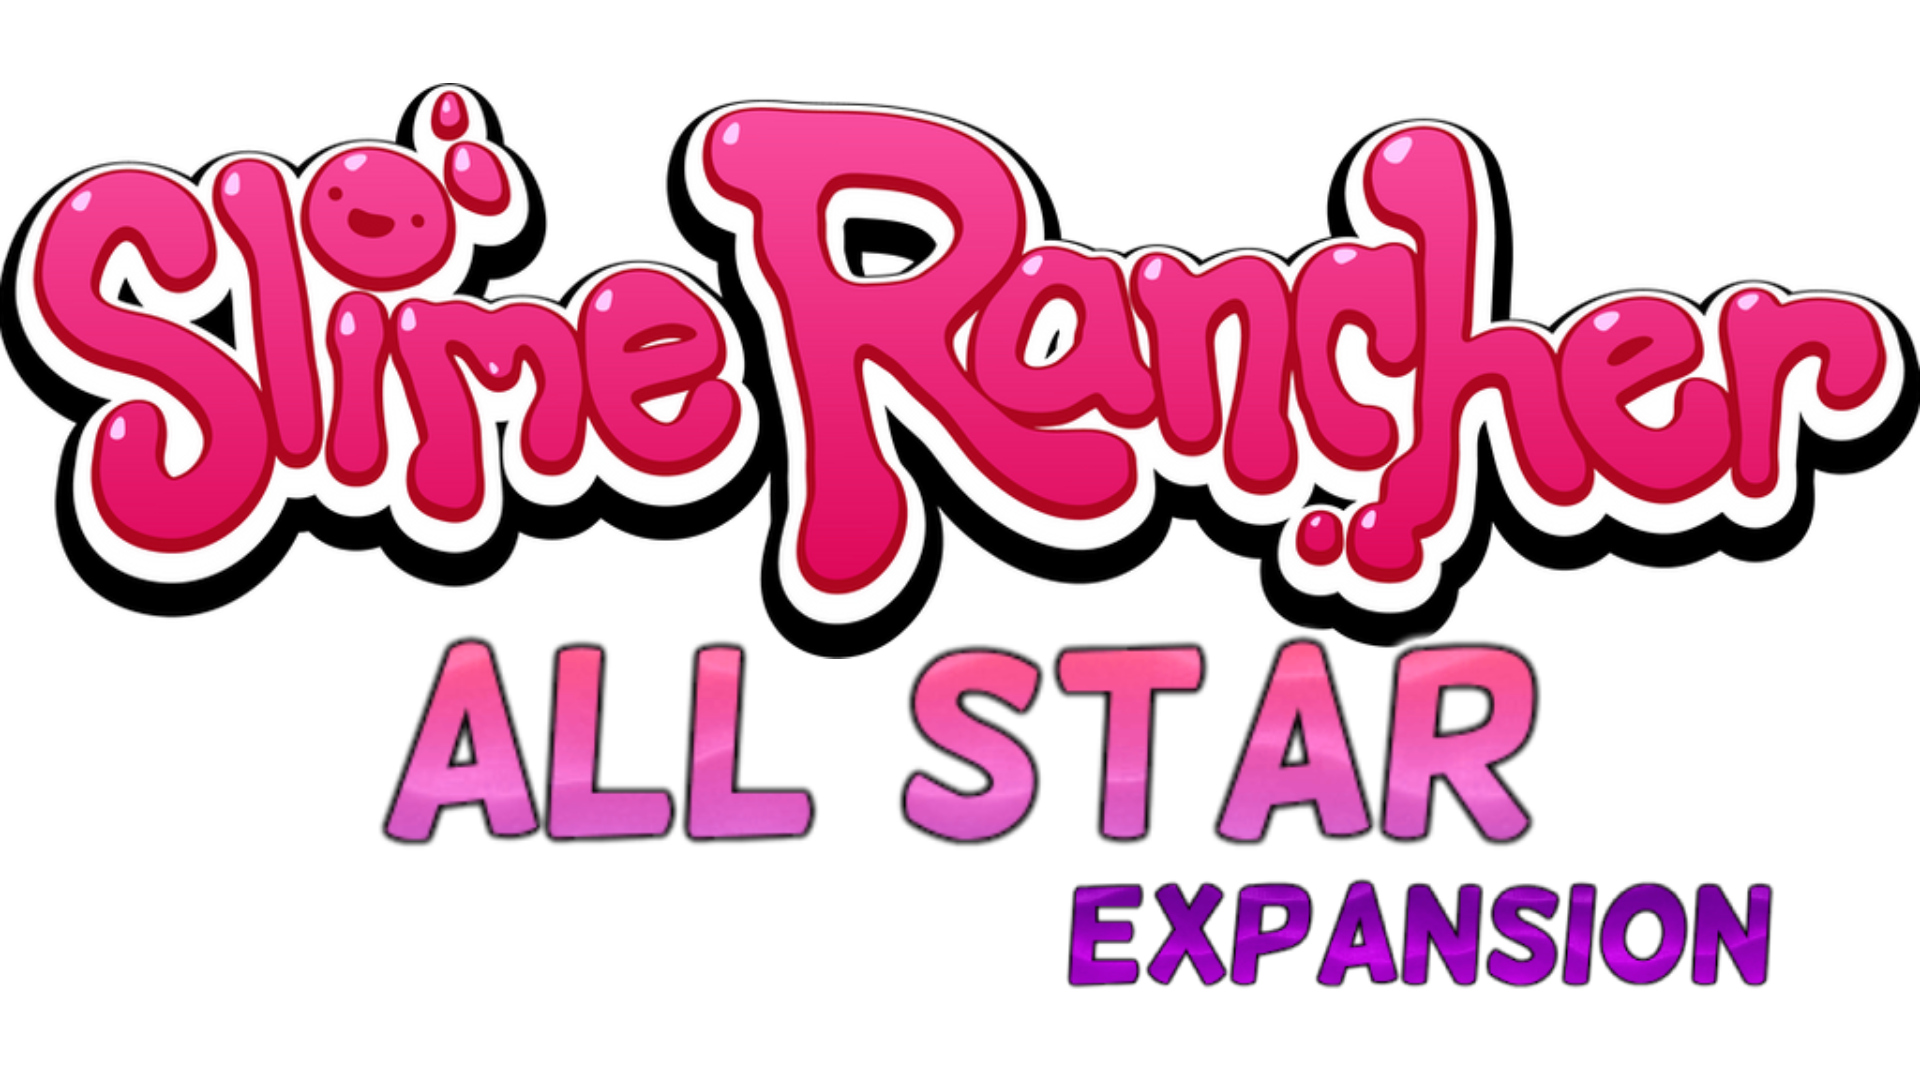 Slime Rancher All Star Expansion